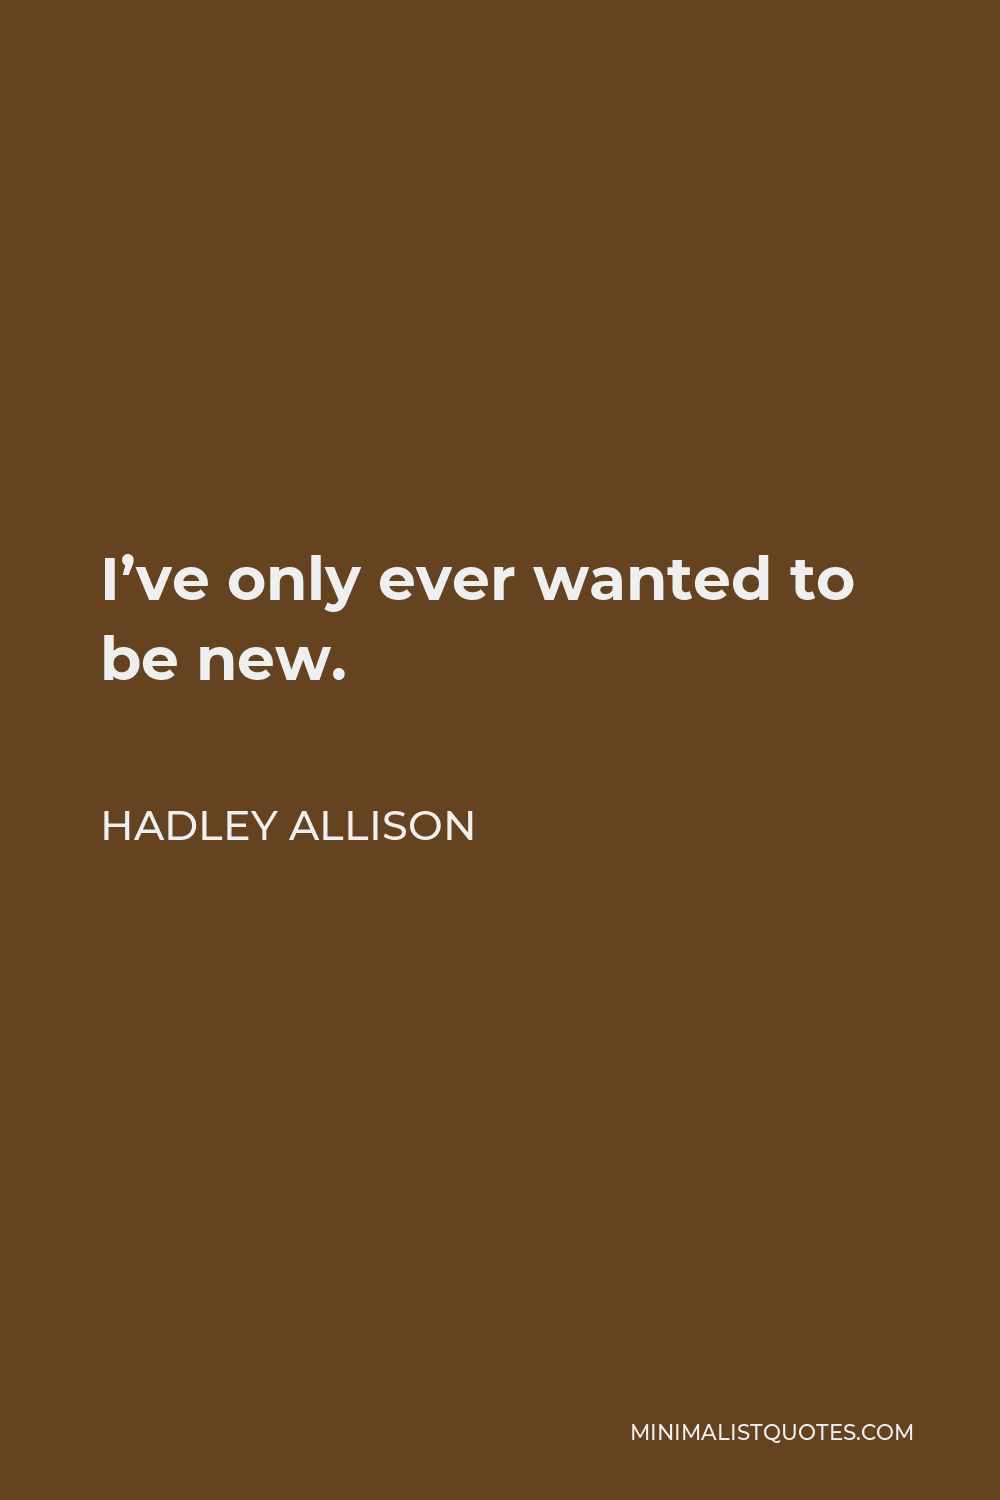 Hadley Allison Quote - I’ve only ever wanted to be new.